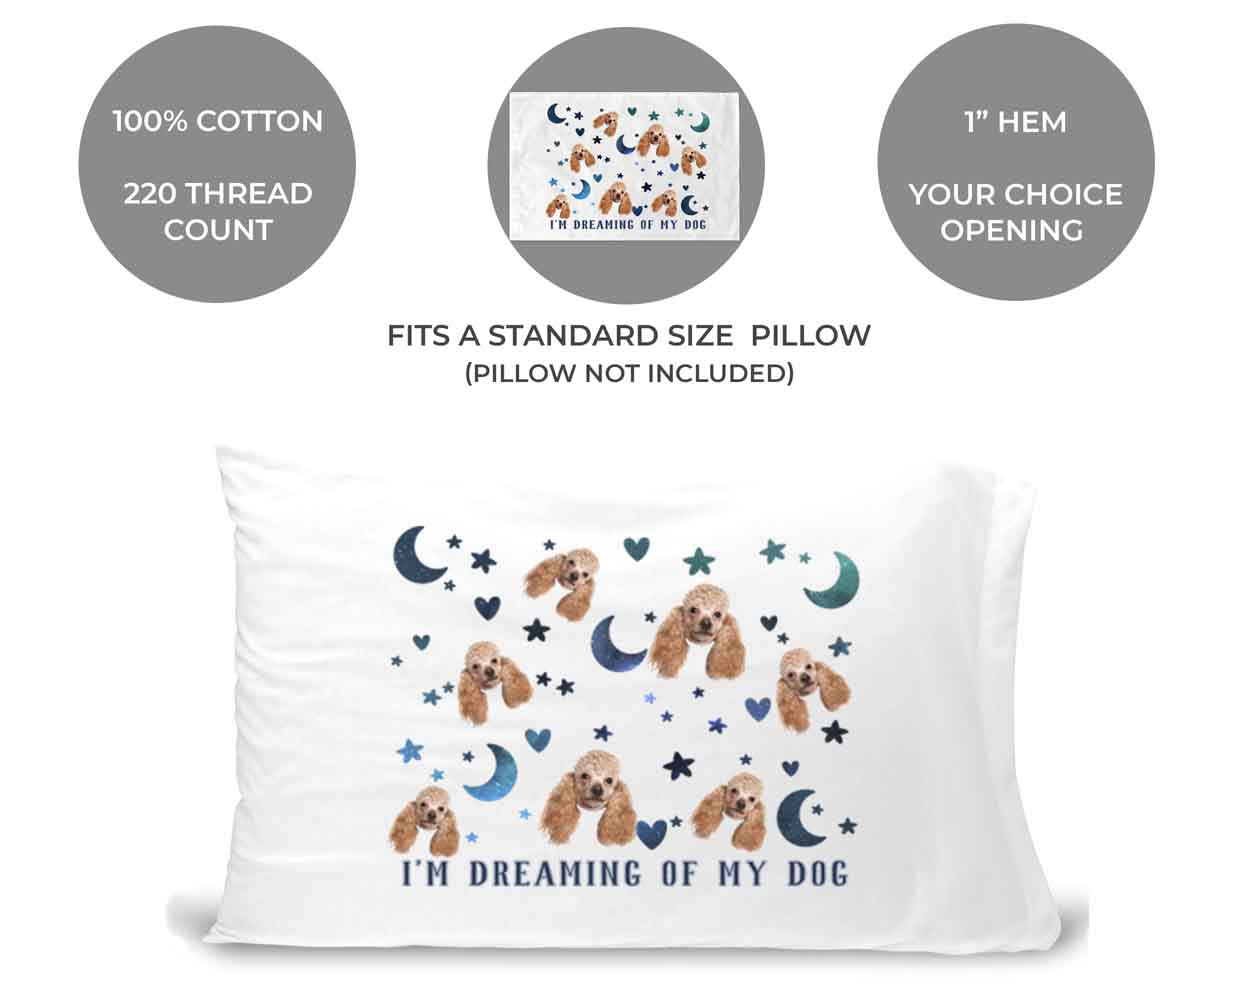 I'm dreaming of my dog and your pets photo face cropped into design custom printed and personalized on standard pillowcase.